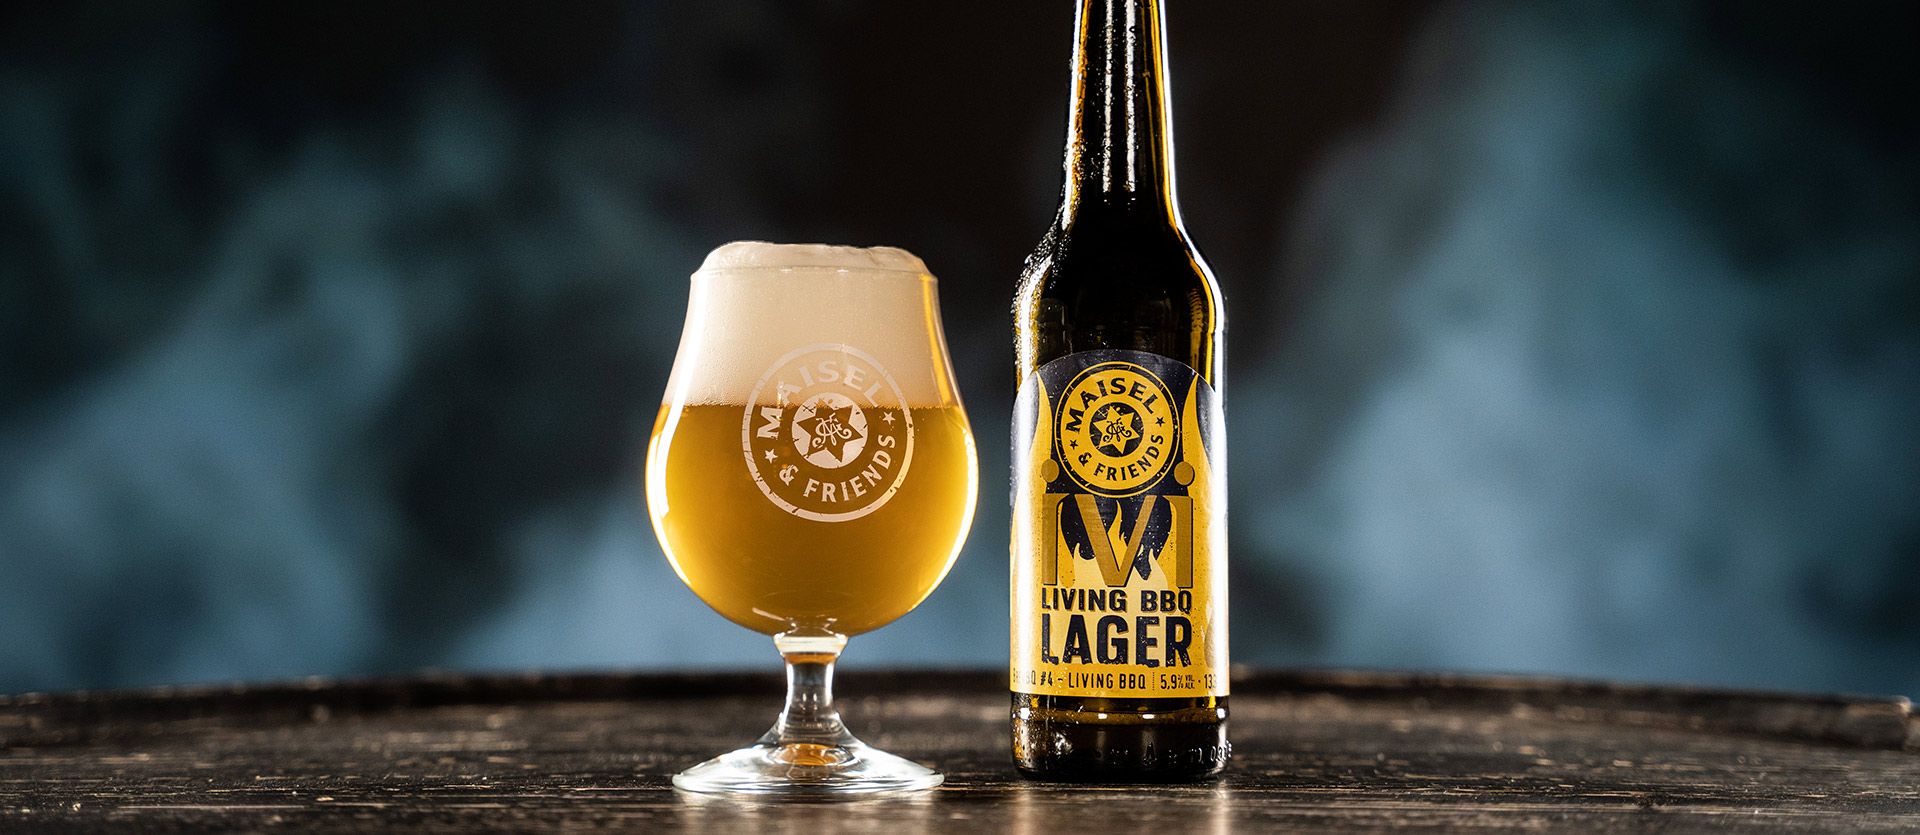 Maisel & Friends Living BBQ Lager is the expert barbecue beer of the BrewBQ series 2023